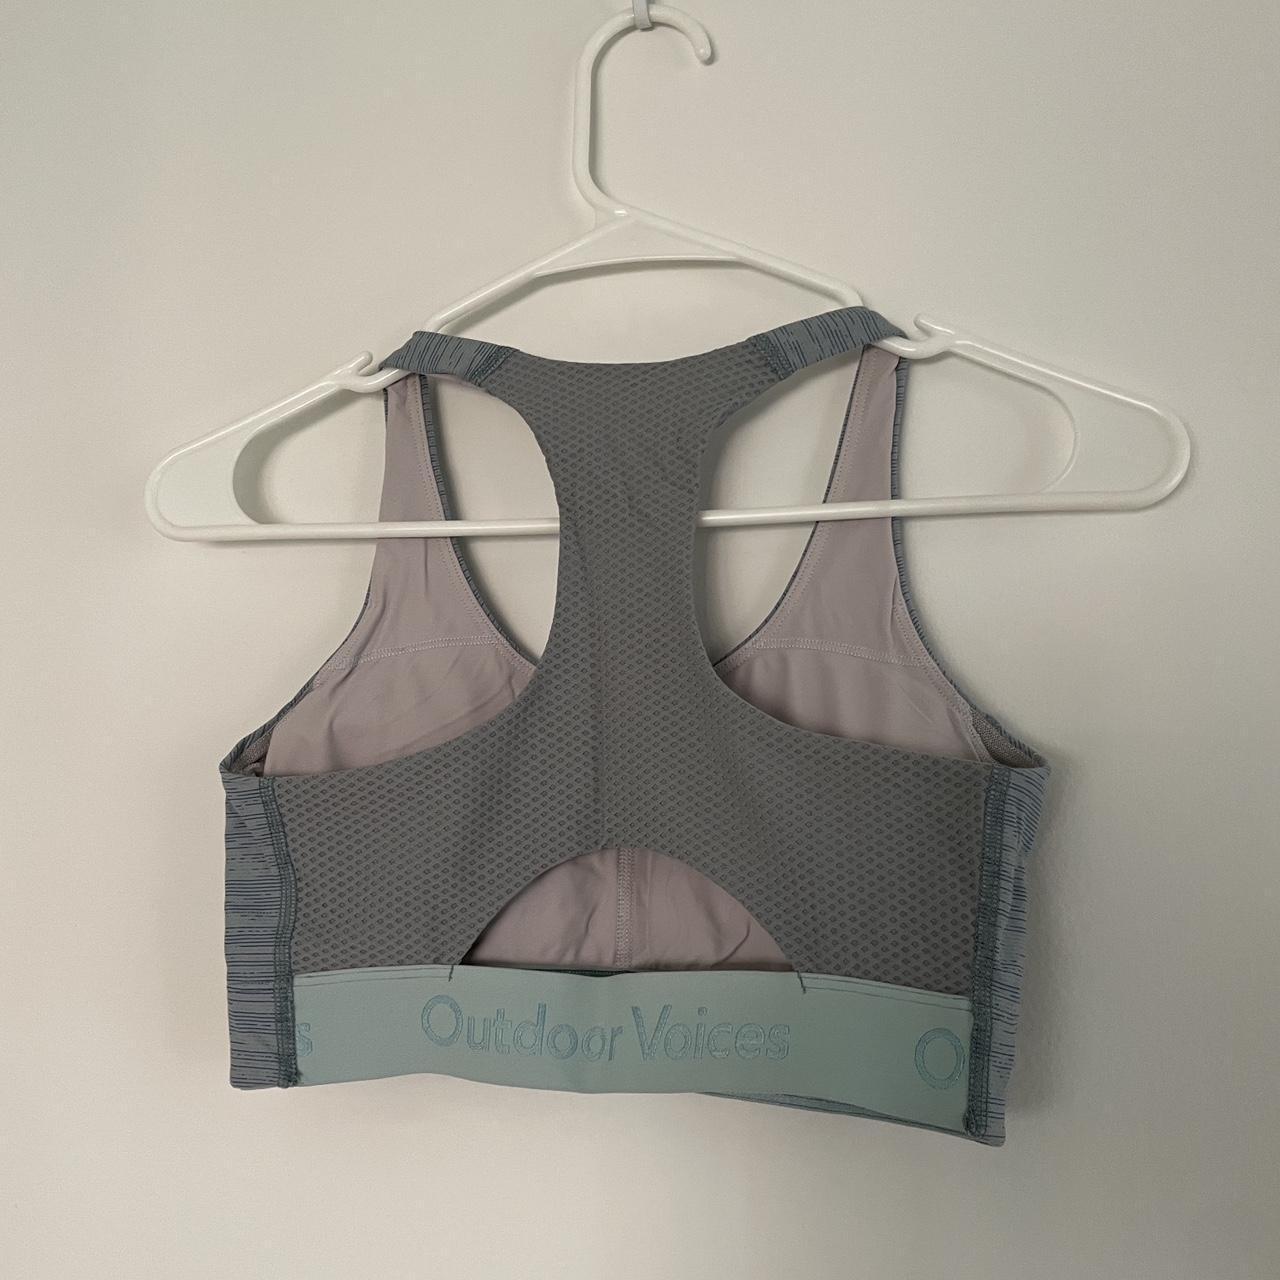 Outdoor Voices doing things bra in light blue , Size XS